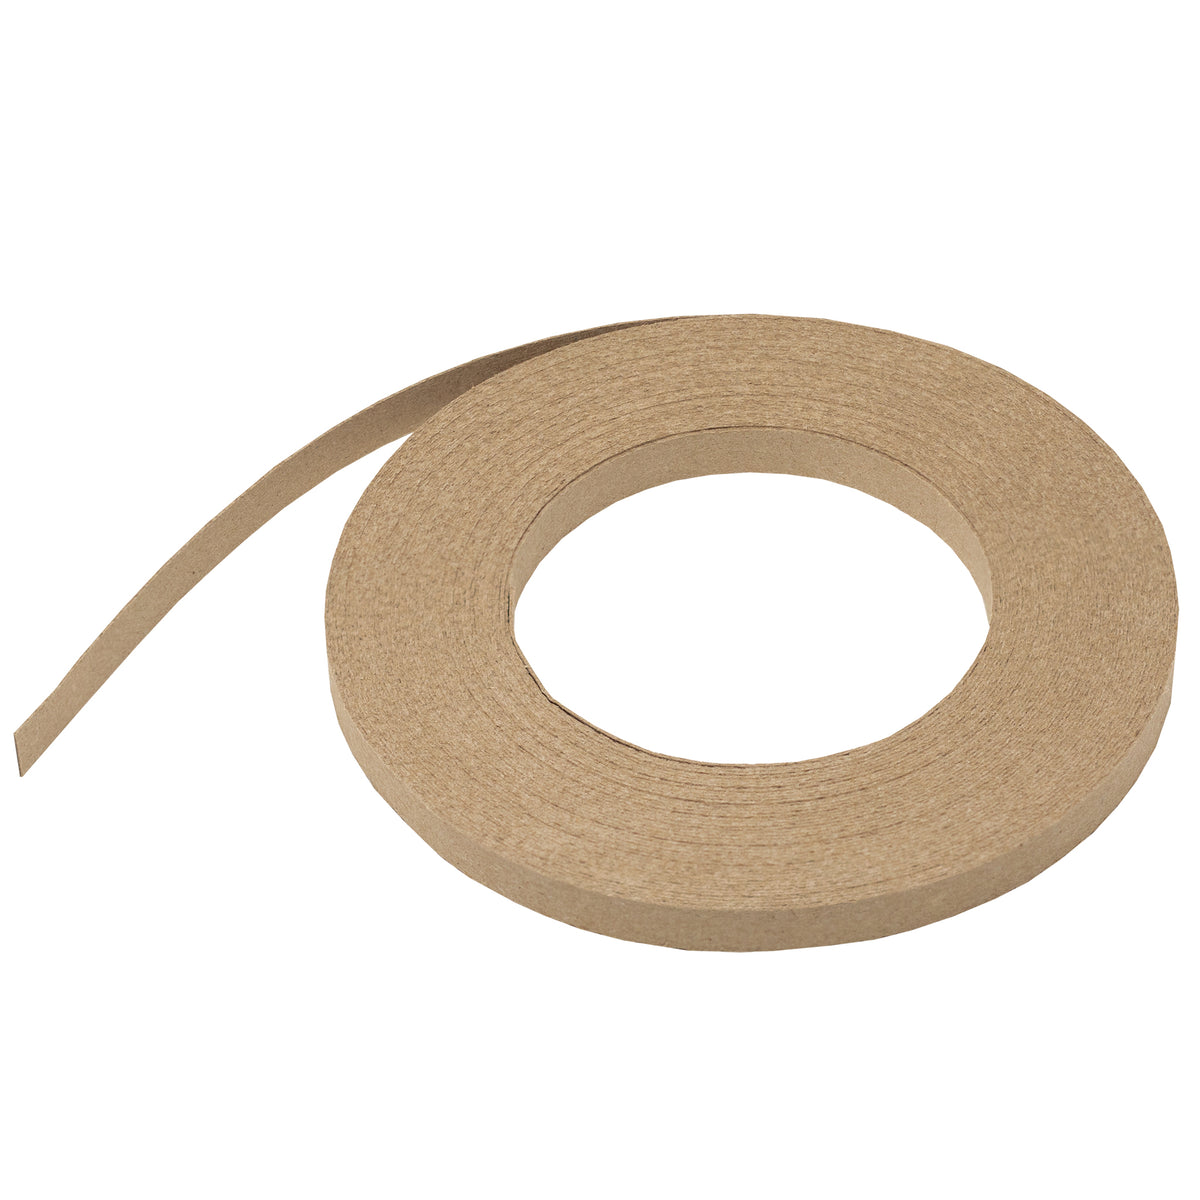 Metal Flexible Tack Strip, Curve Ease for Upholstery- 20ft